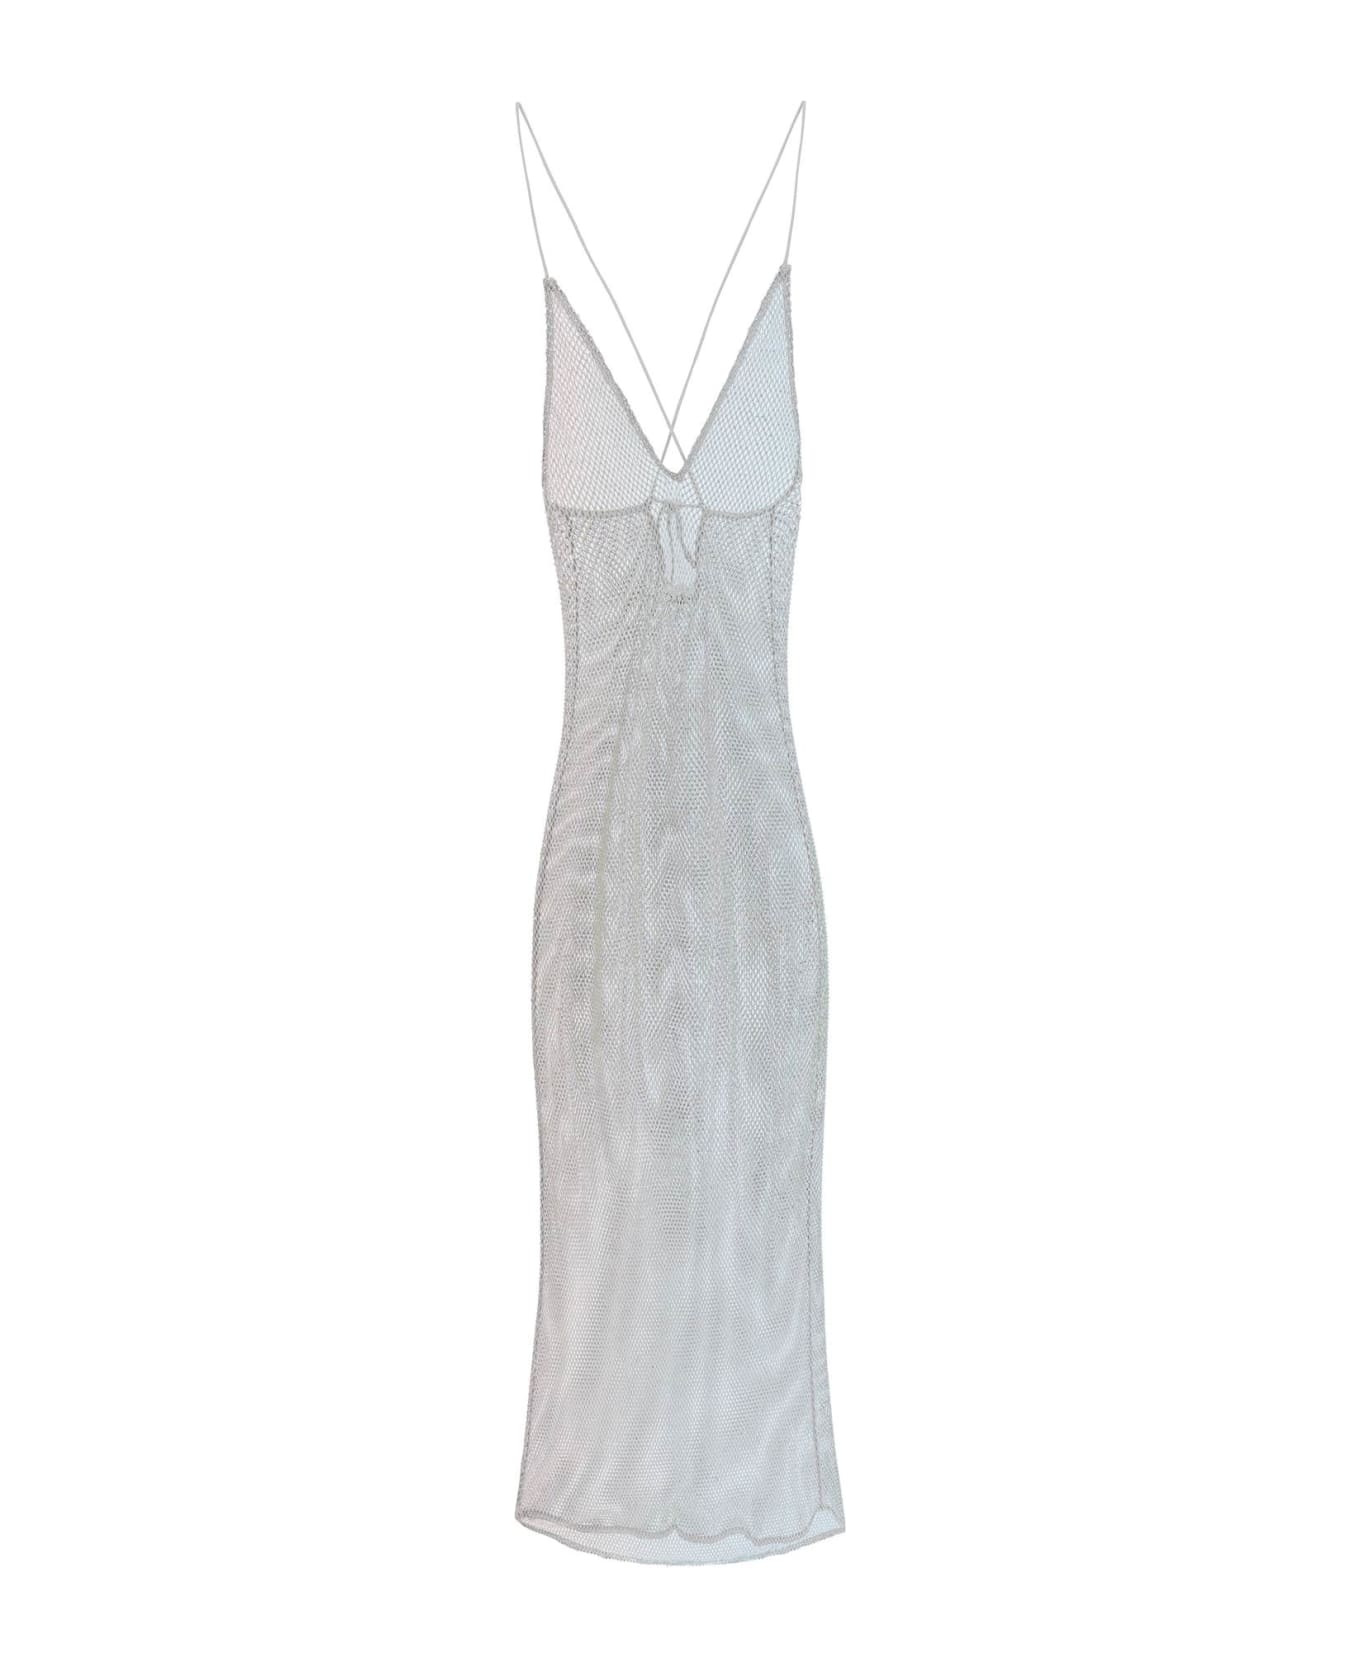 Ganni Long Mesh Dress With Crystals - SILVER (Silver)